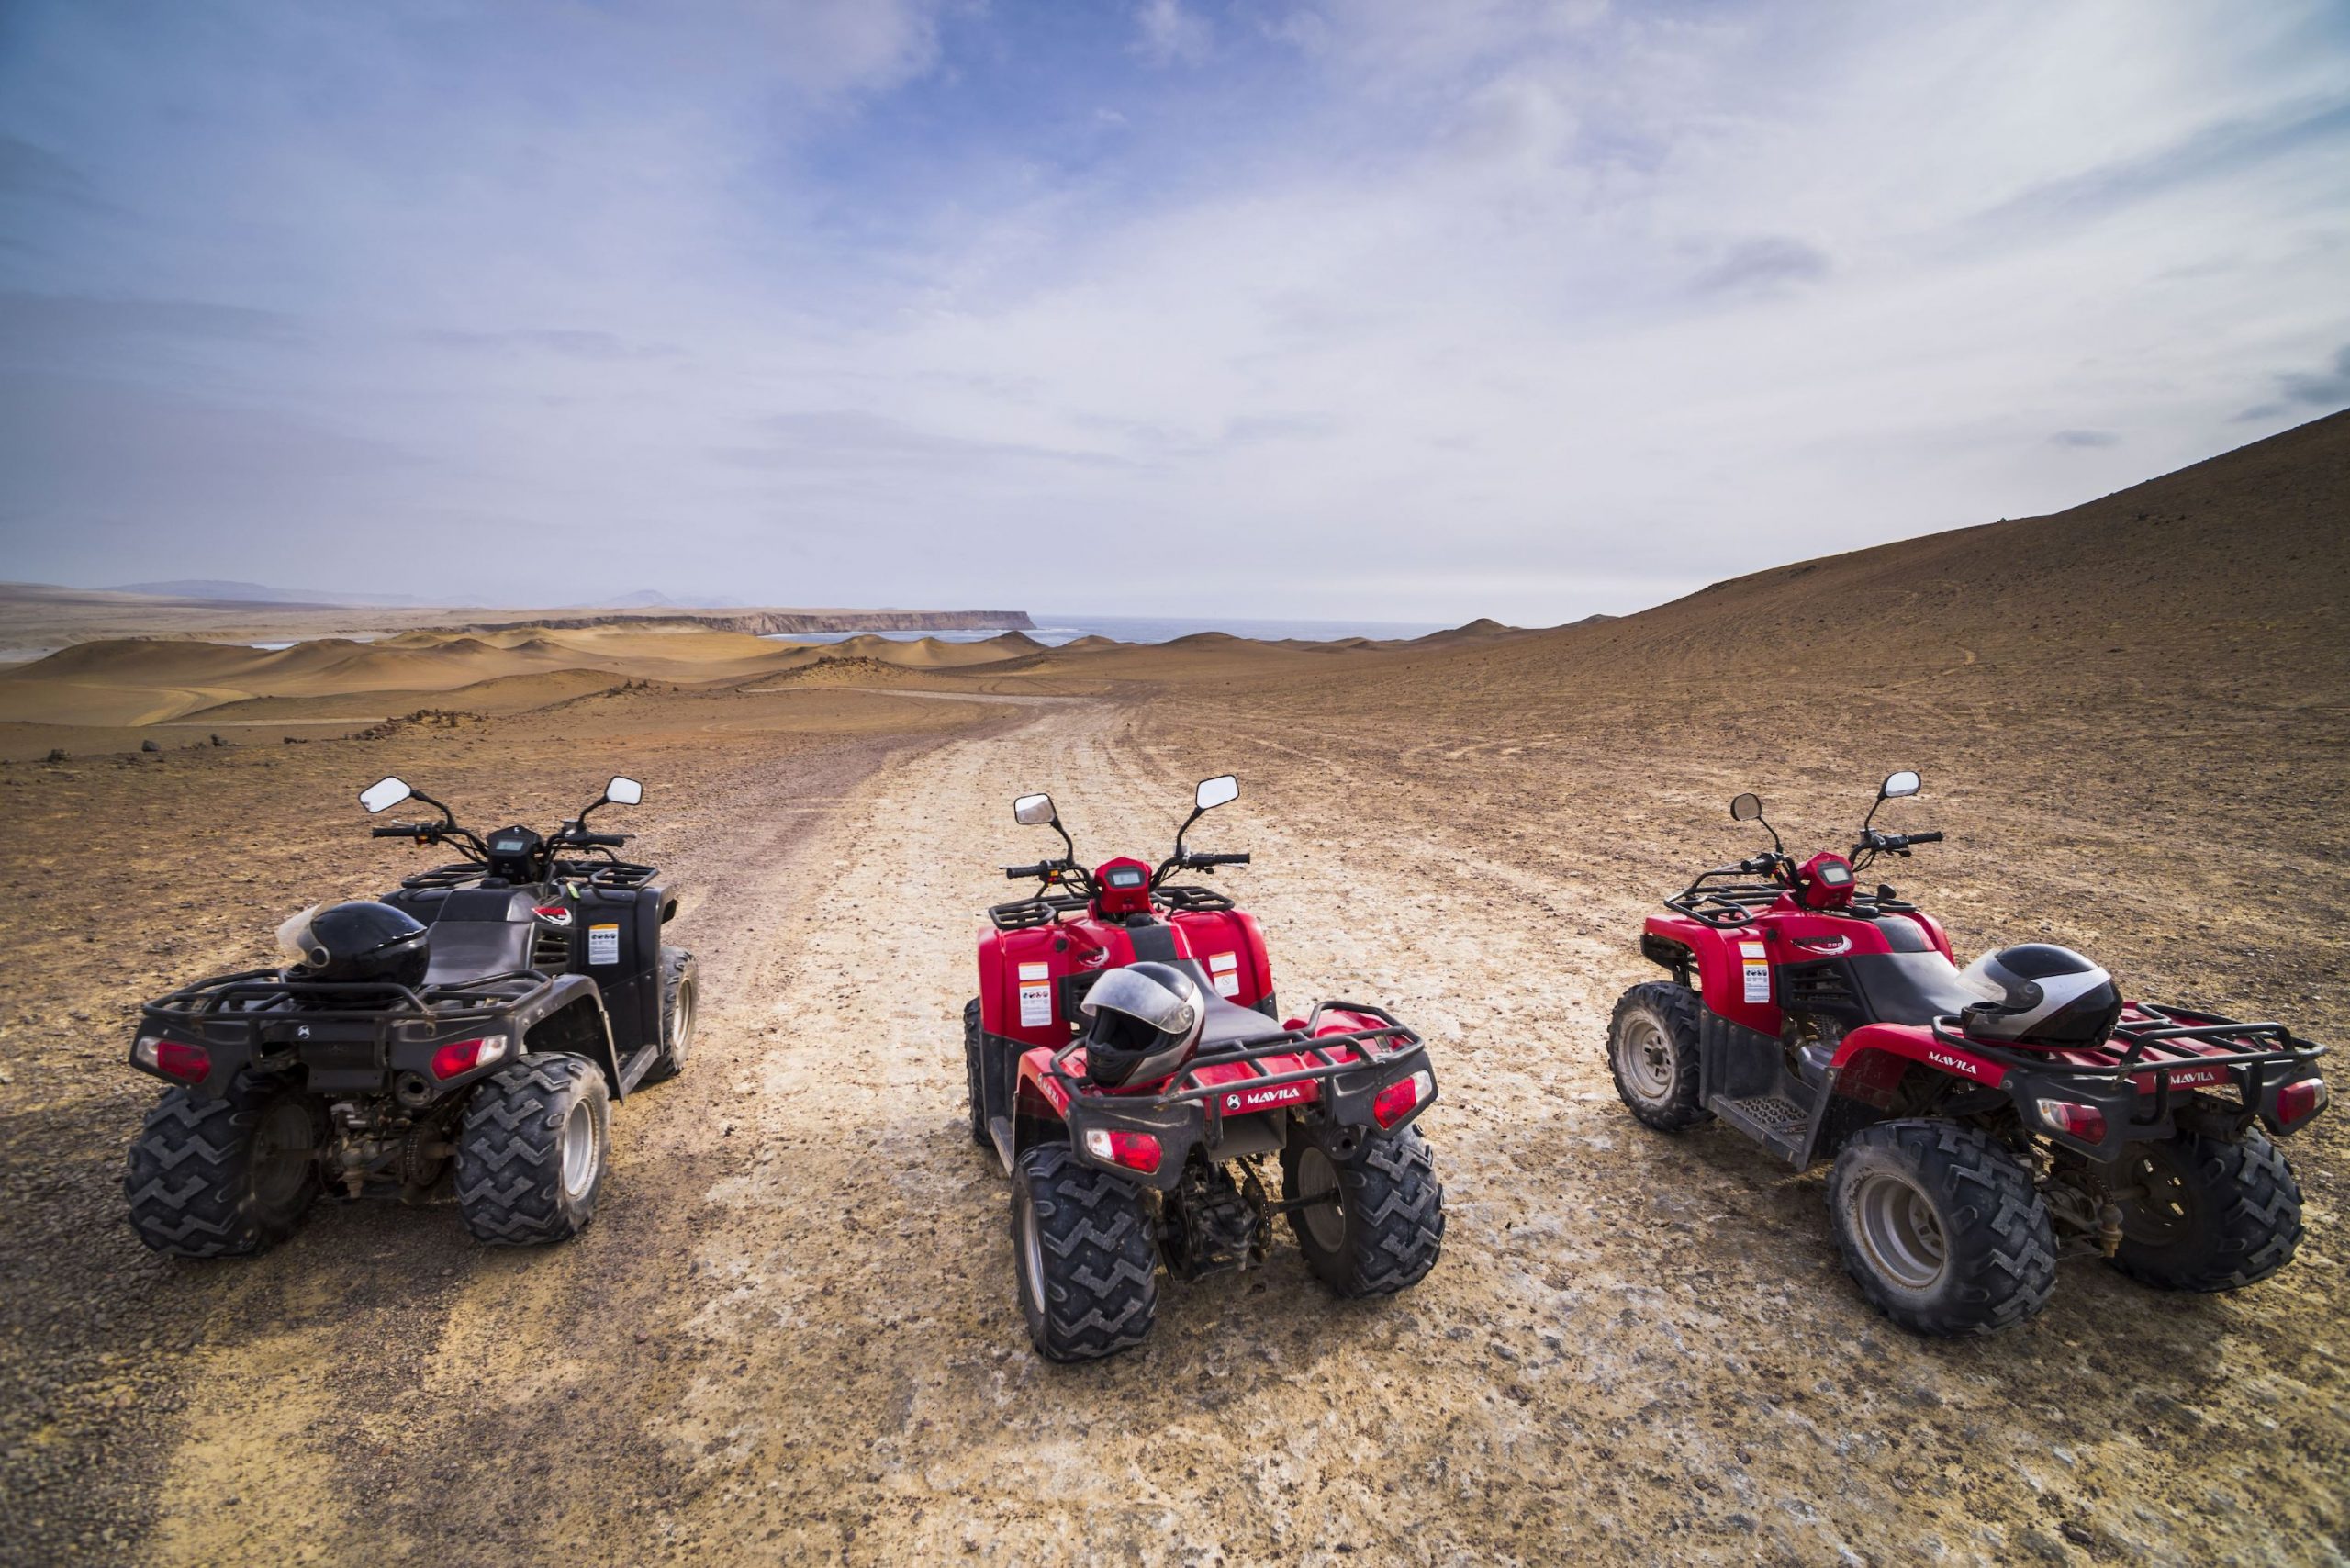 Three used ATVs parked in the desert.